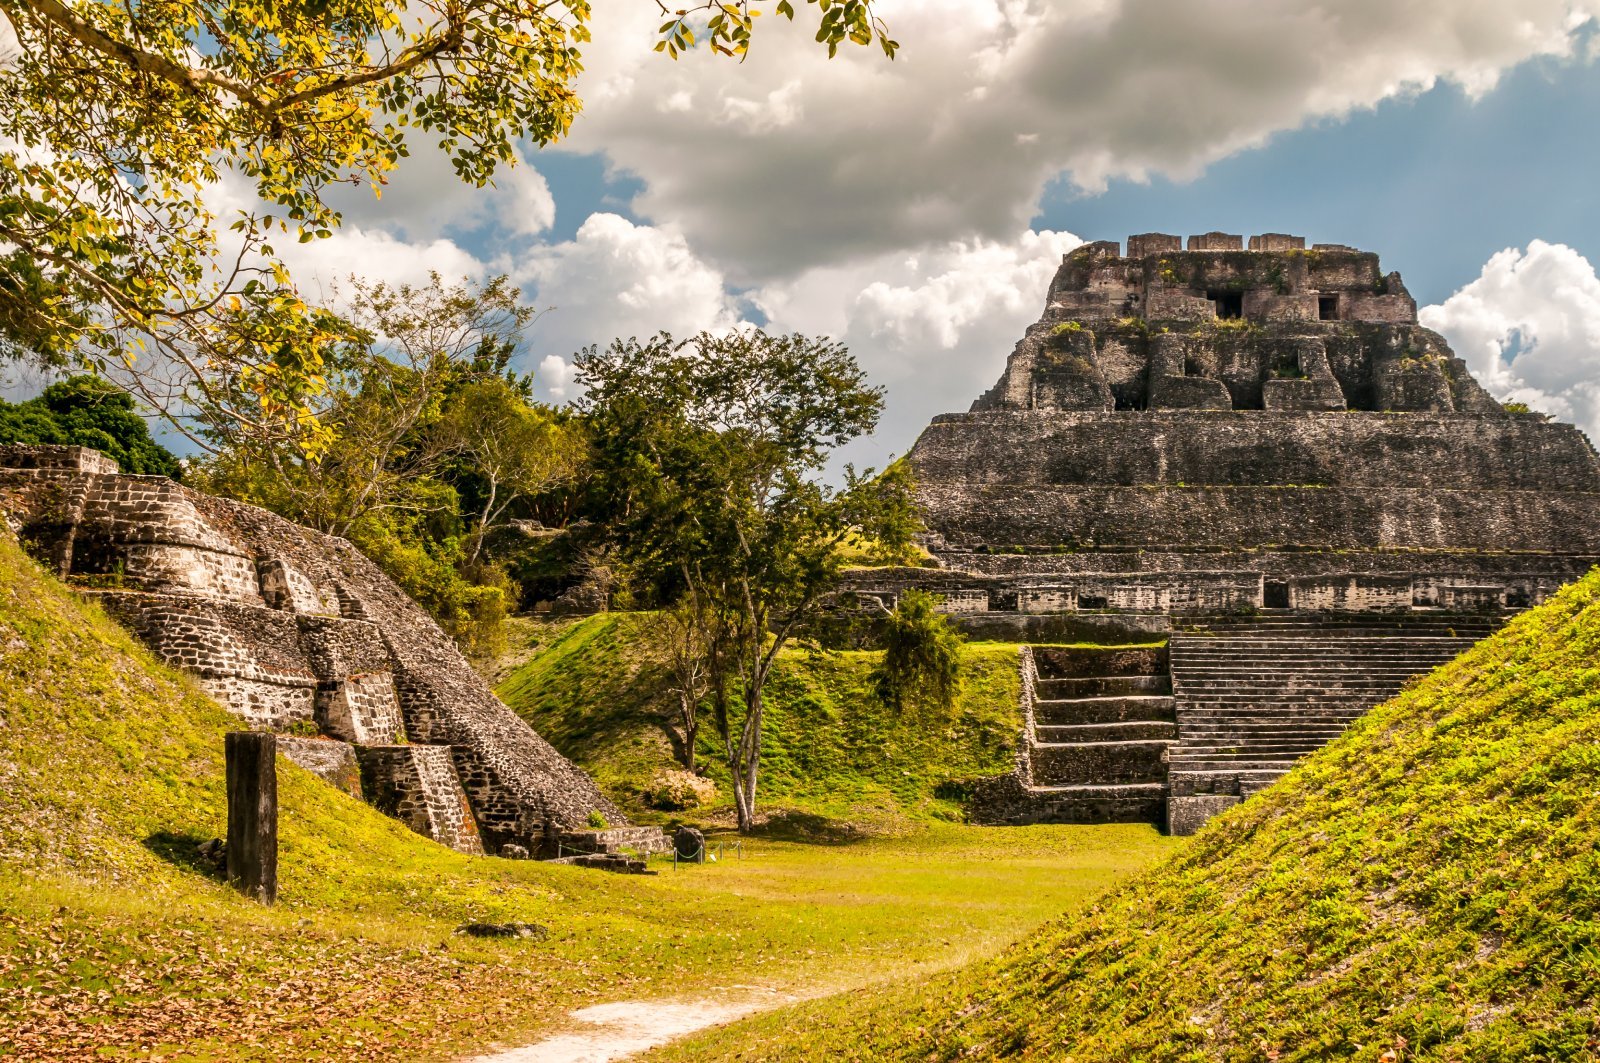 <p class="wp-caption-text">Image Credit: Shutterstock / milosk50</p>  <p><span>Xunantunich, meaning “Stone Woman” in the Maya language, showcases the spiritual depth of the ancient Maya civilization. Located in the Cayo District, this archaeological site is home to El Castillo, one of the tallest structures in Belize, offering panoramic views of the surrounding jungle and the Mopan River. The site’s plazas, palaces, and ball courts narrate the social and ceremonial life of the Maya, while the friezes and carvings reveal their artistic and astronomical achievements.</span></p>